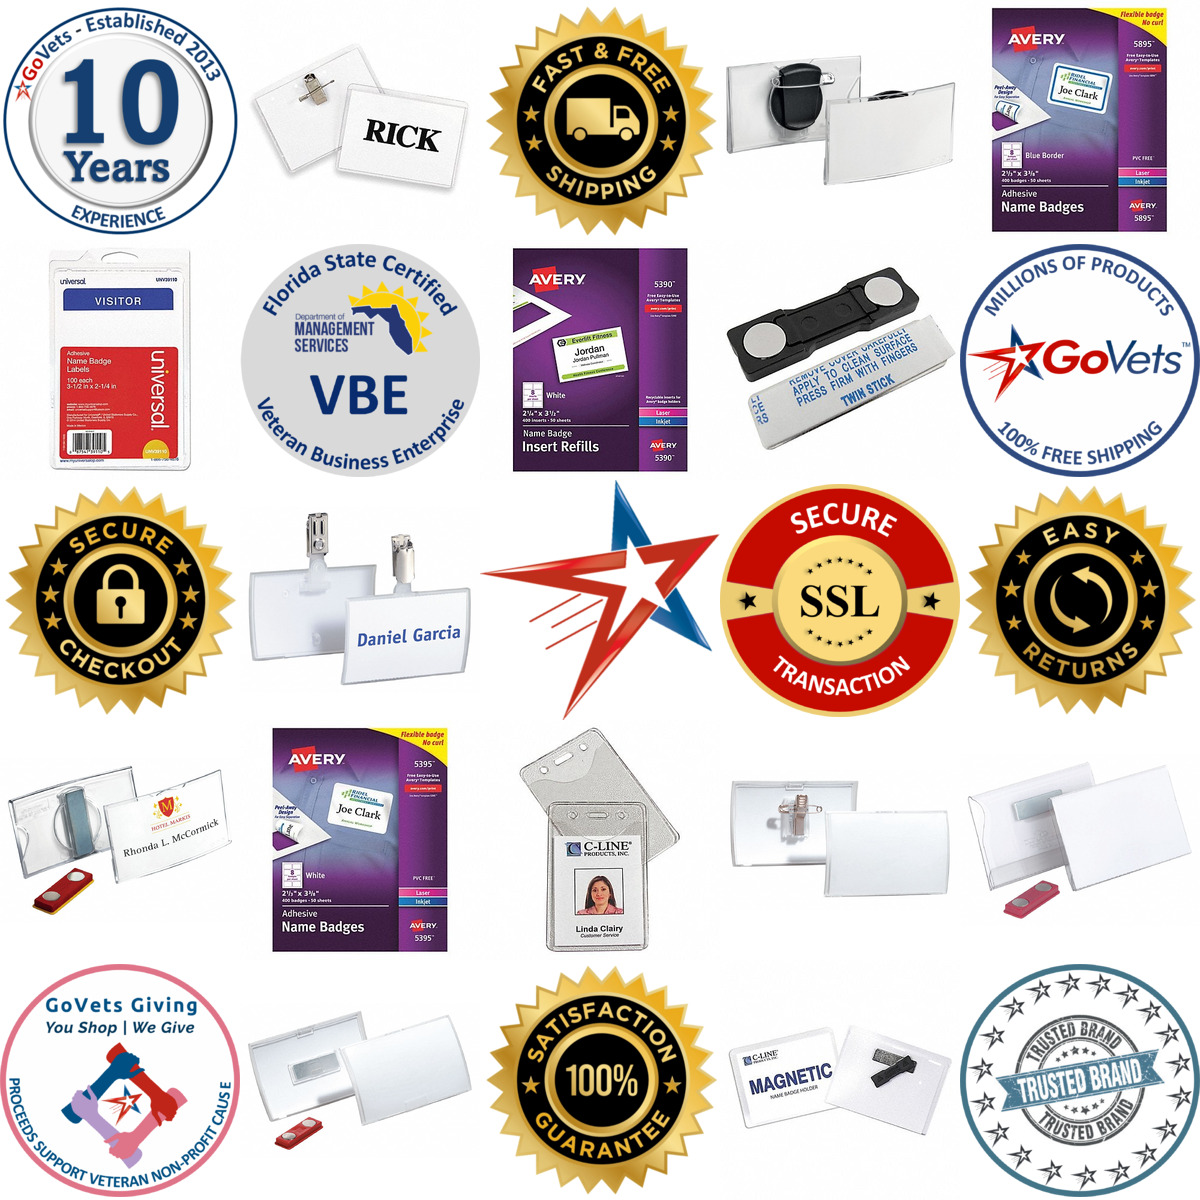 A selection of Name Badges products on GoVets